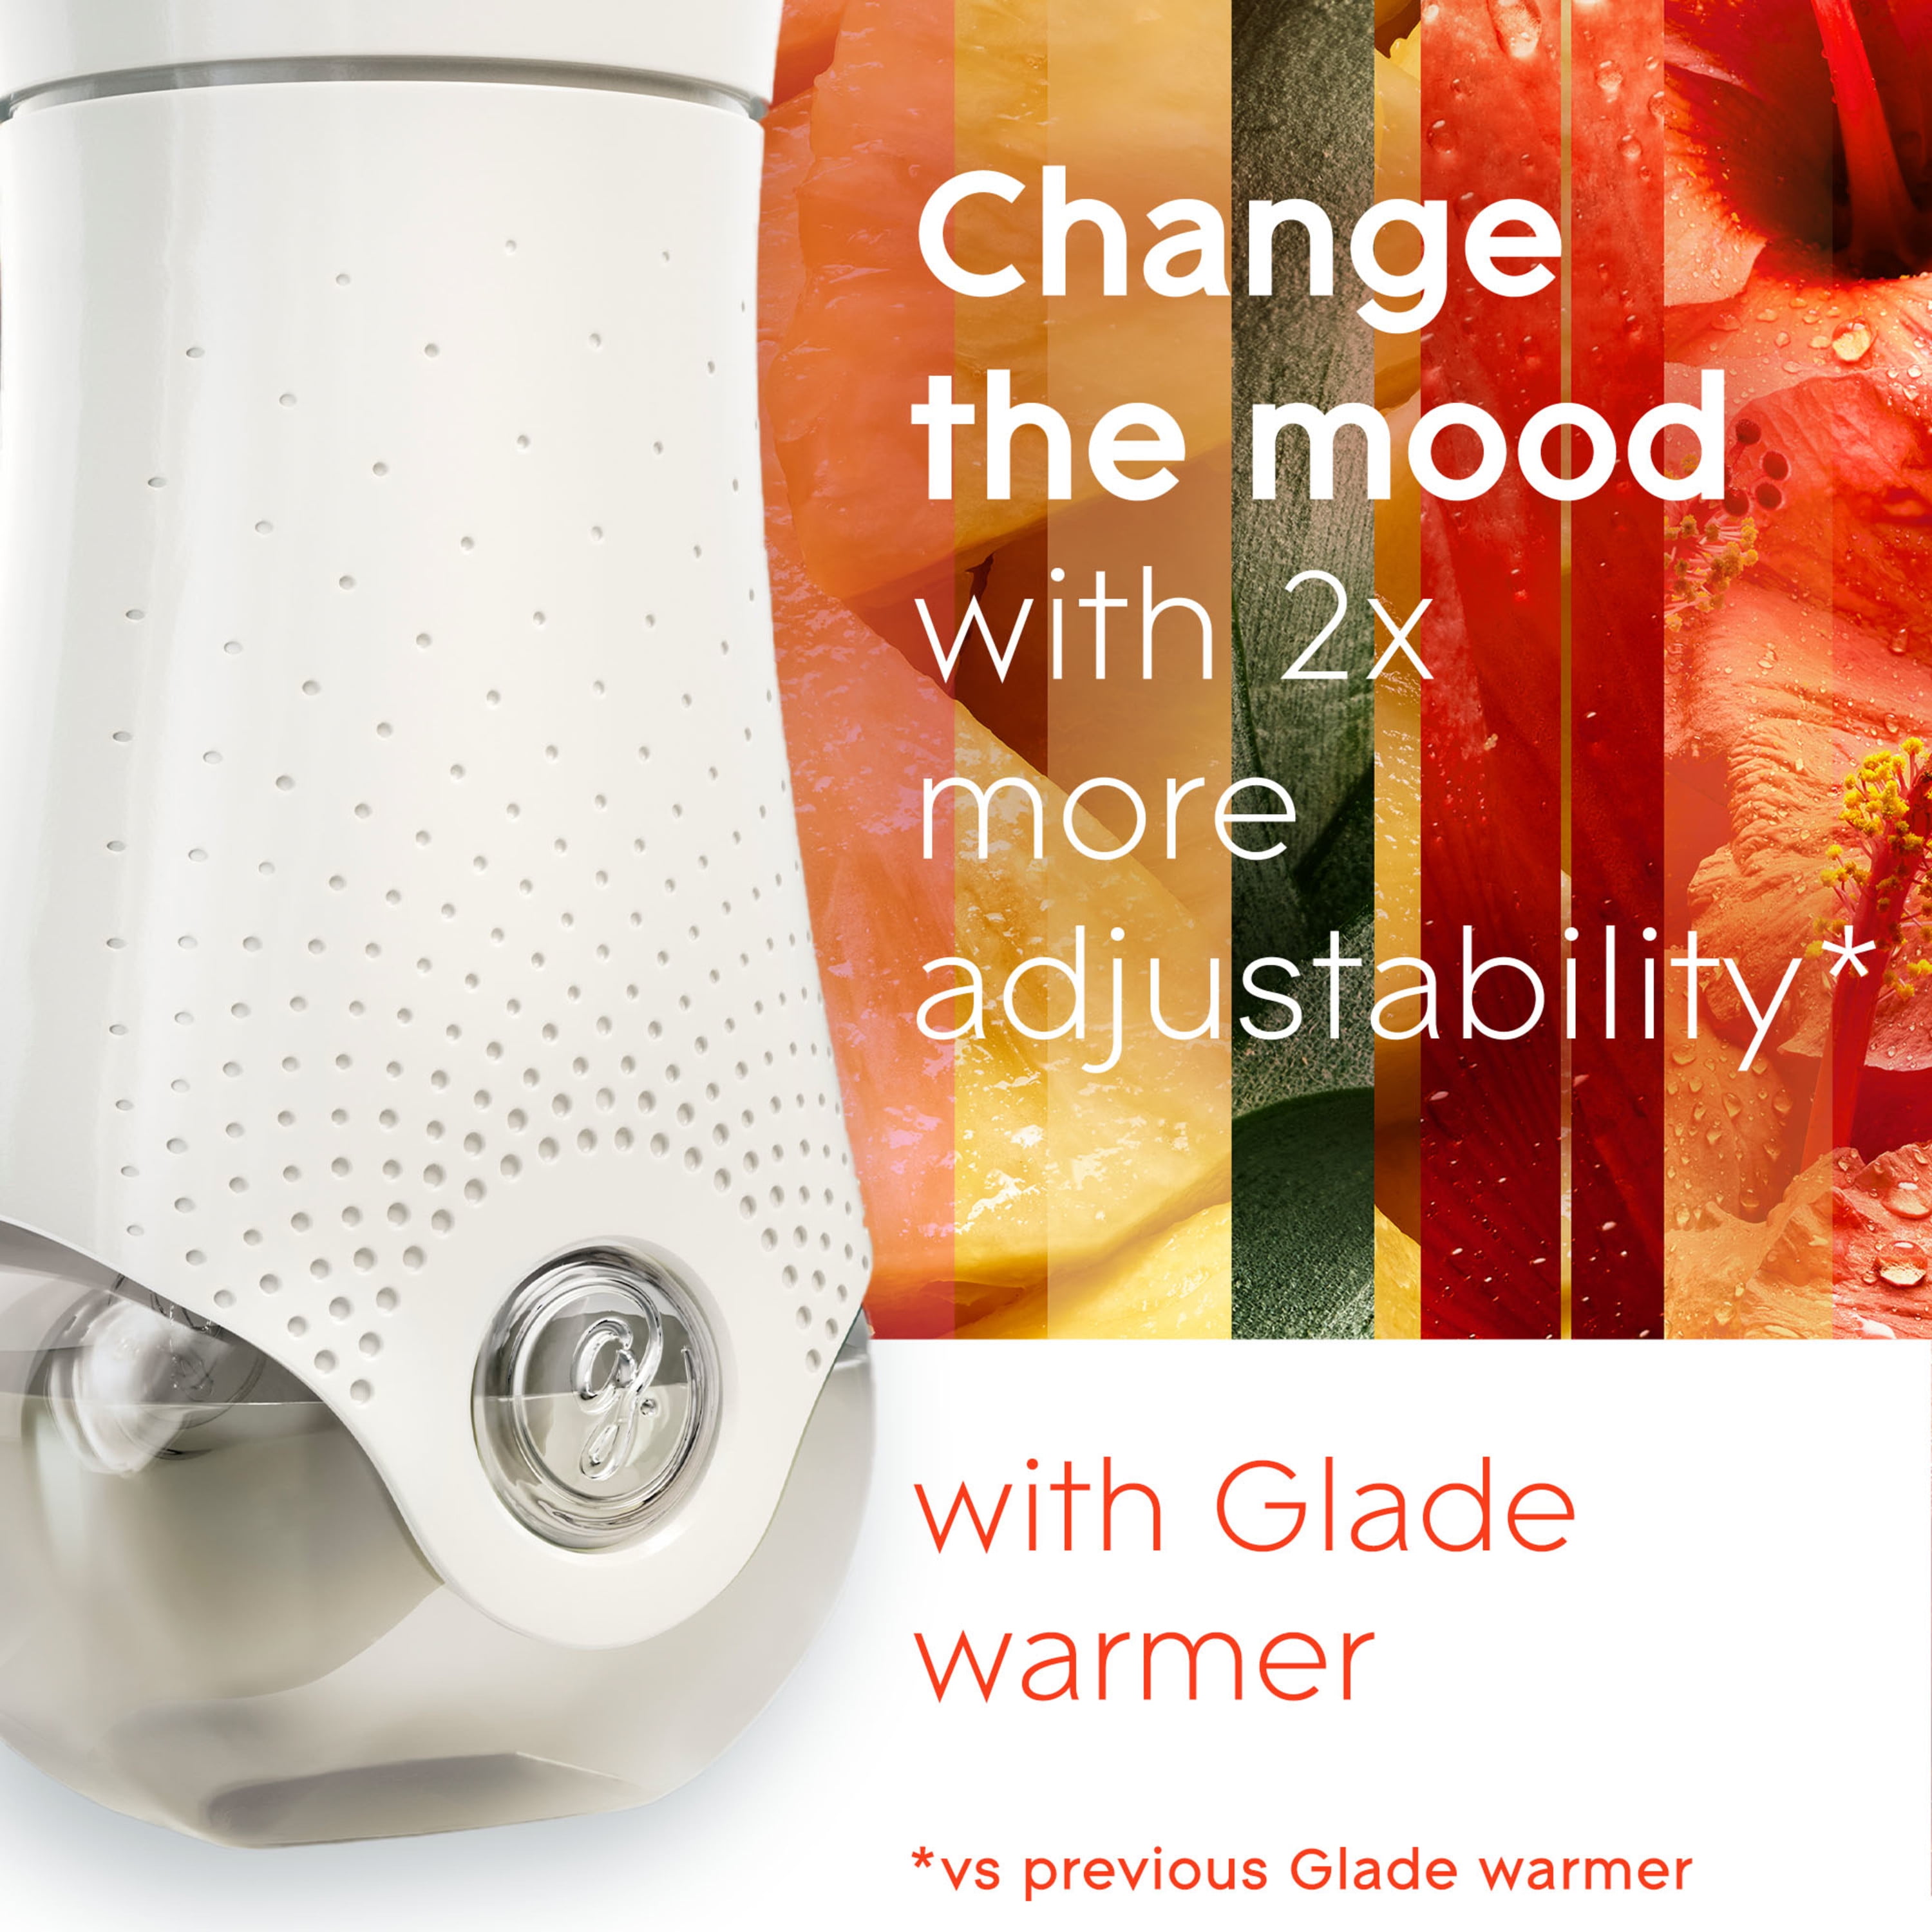 Glade® PlugIns® Scented Oil Warmer, White